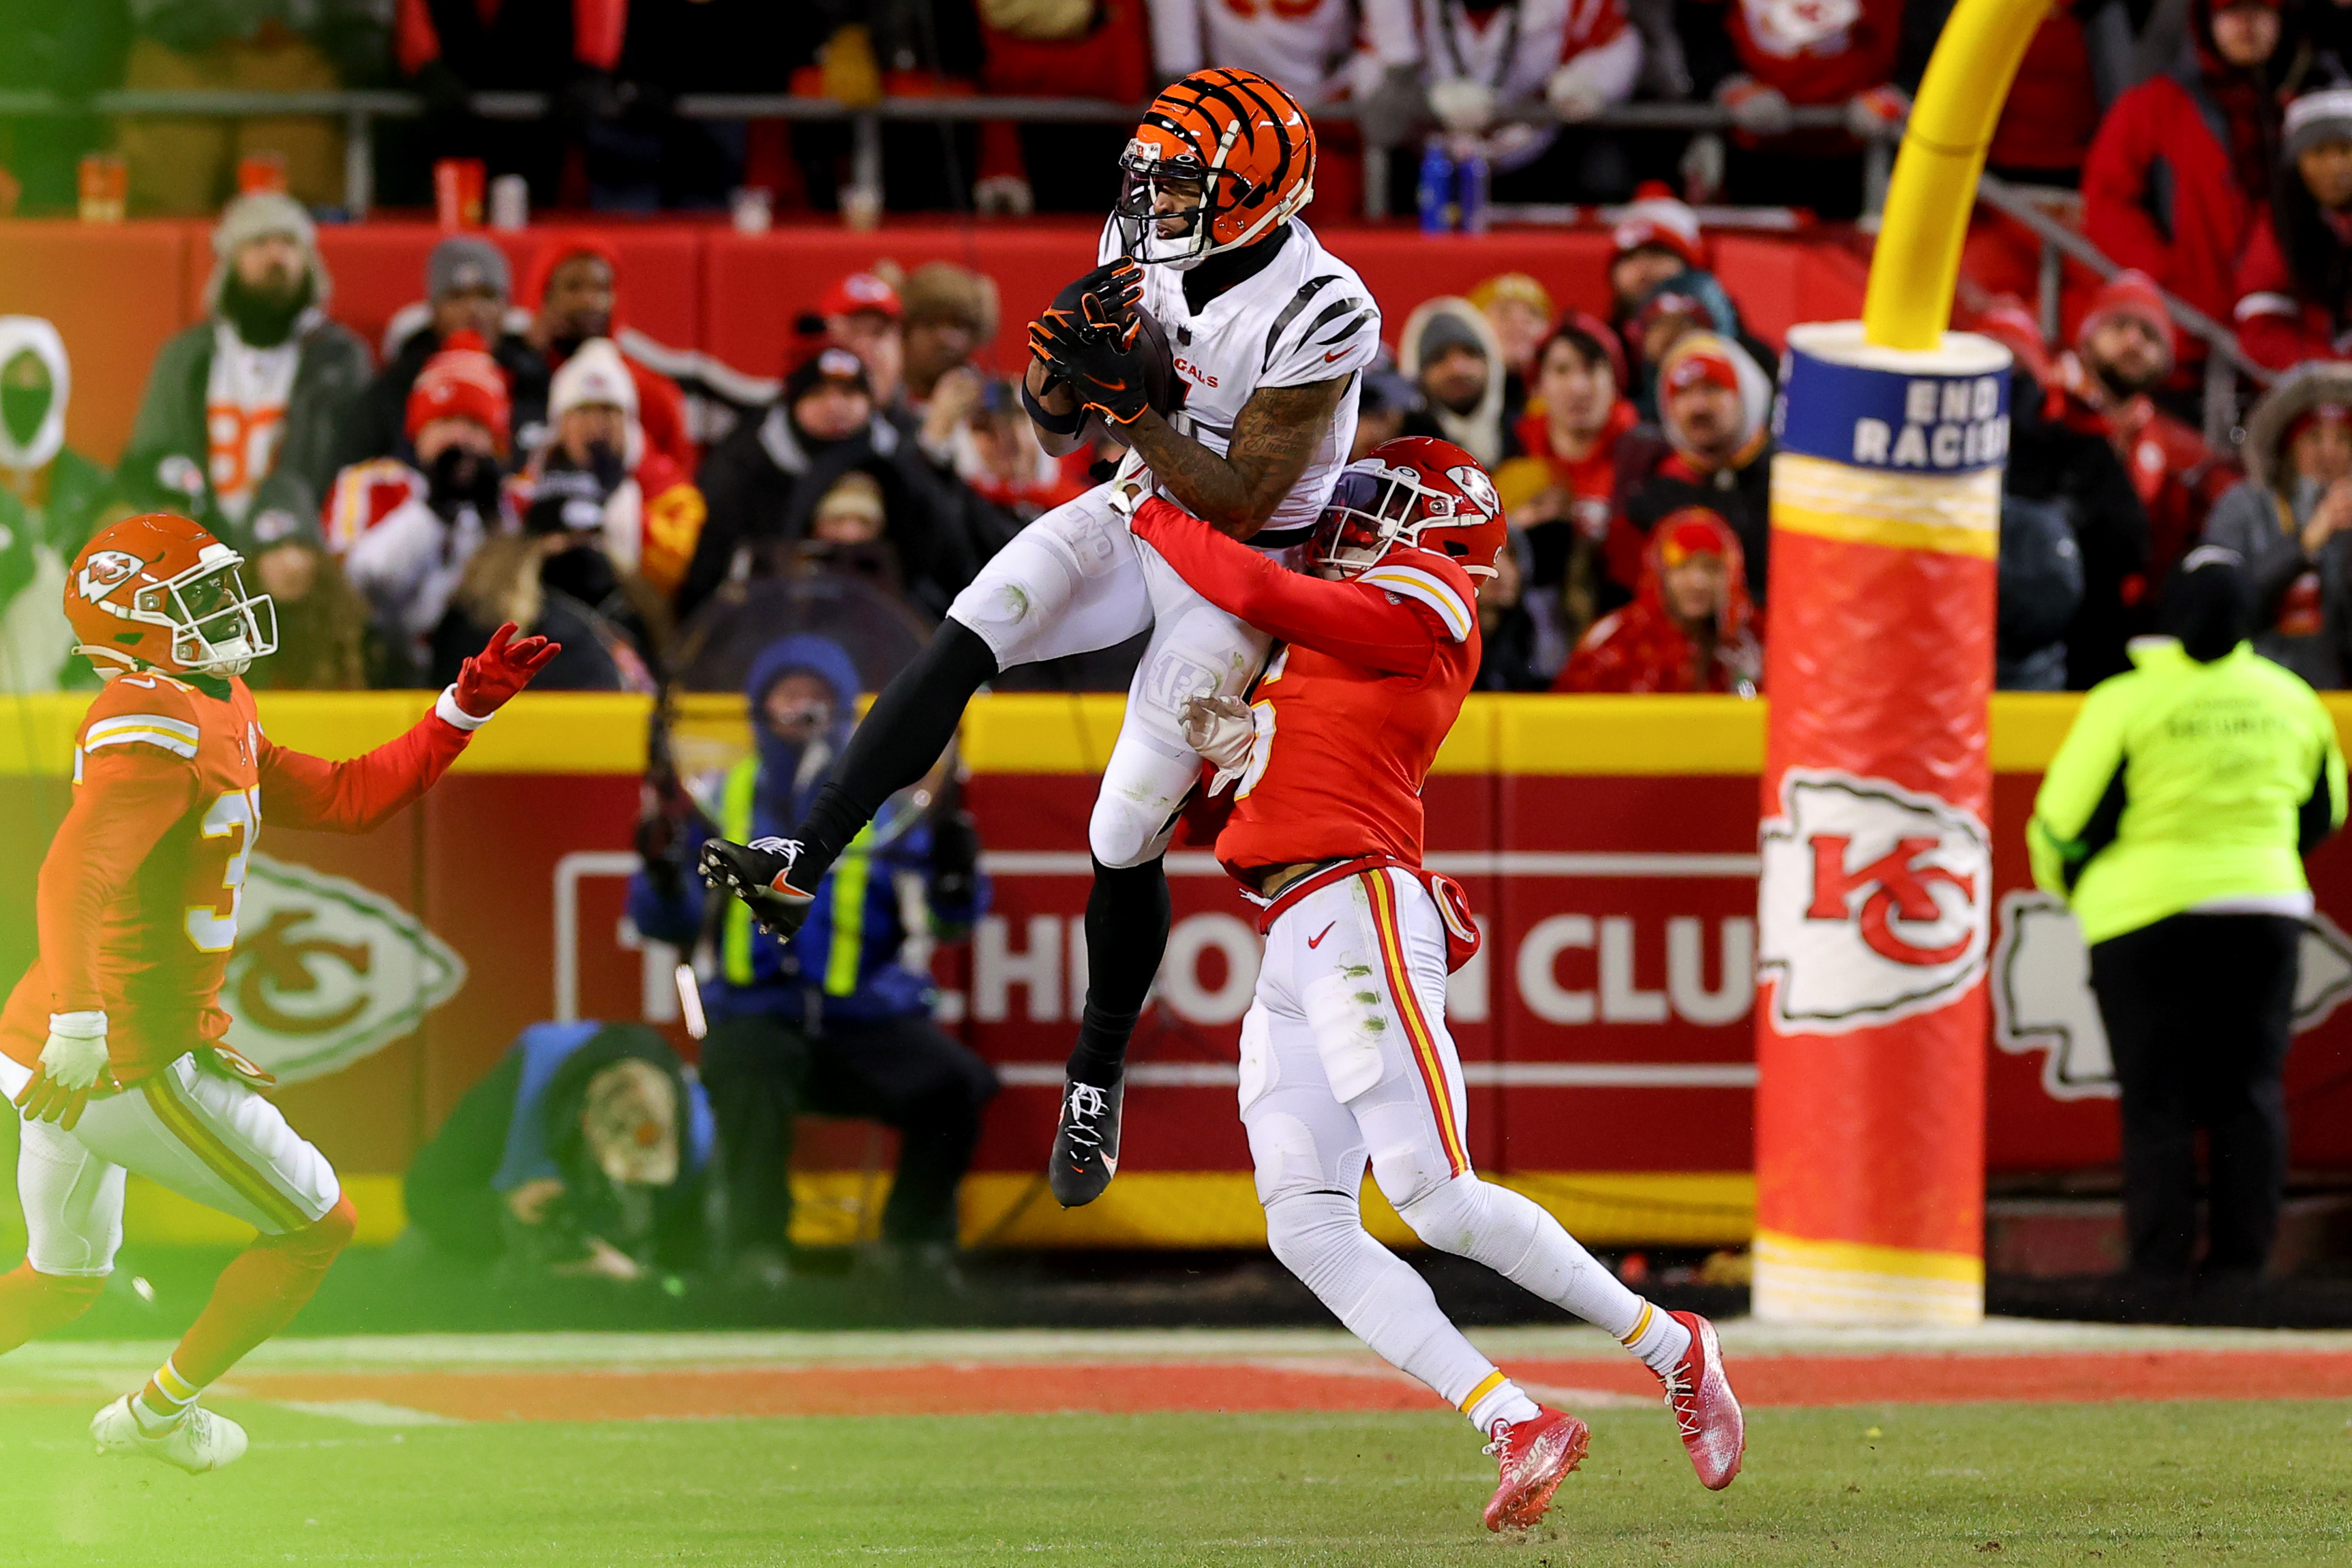 Bengals lose heartbreaking AFC Championship Game to Chiefs after bad penalty